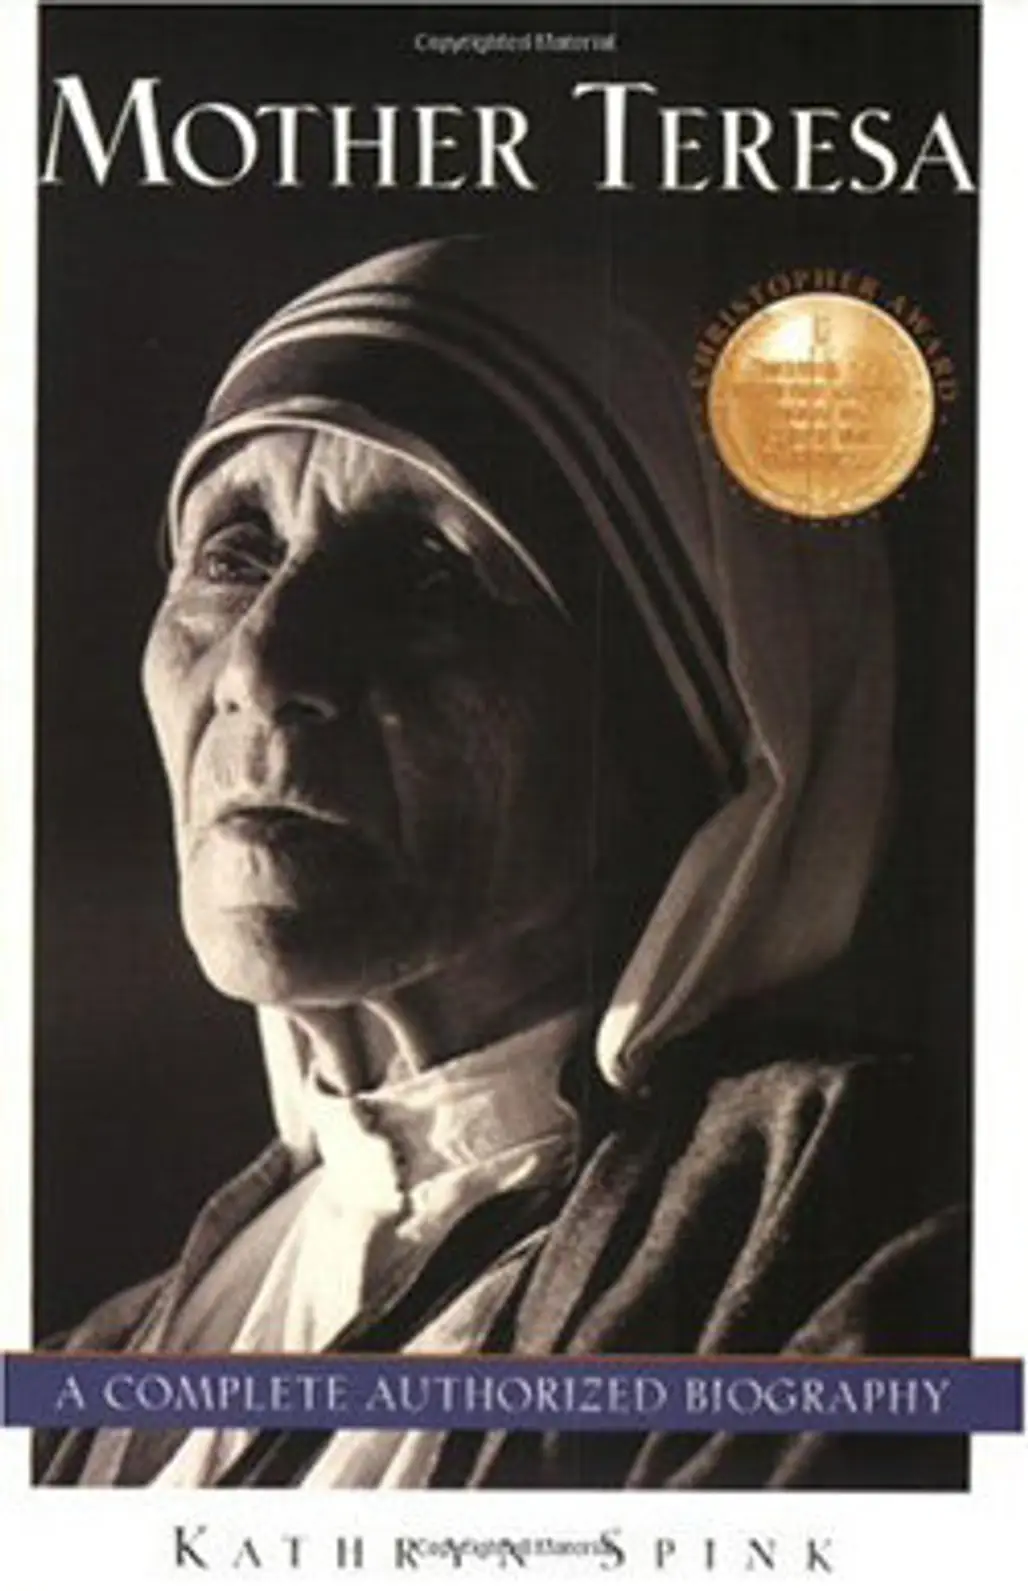 Mother Teresa: a Complete and Authorized Biography by Kathryn Spink